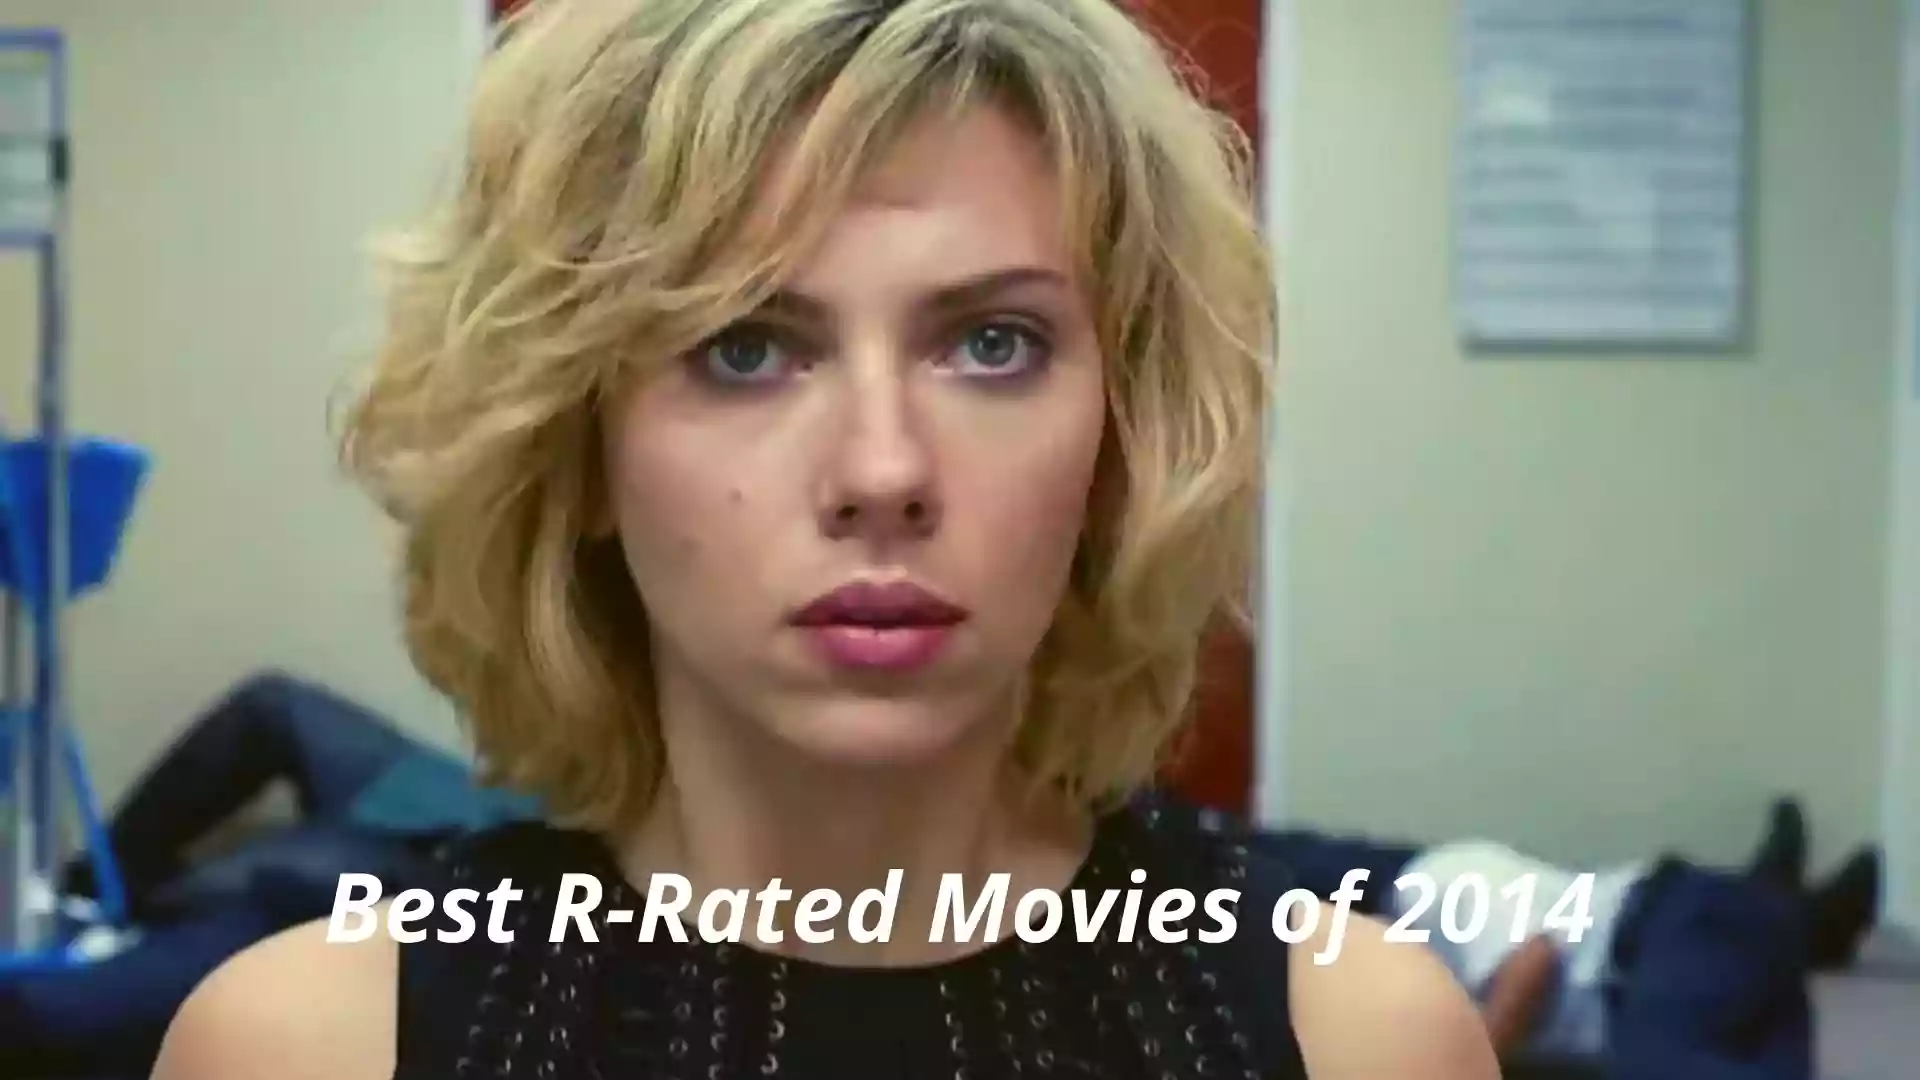 Best R-Rated Movies of 2014